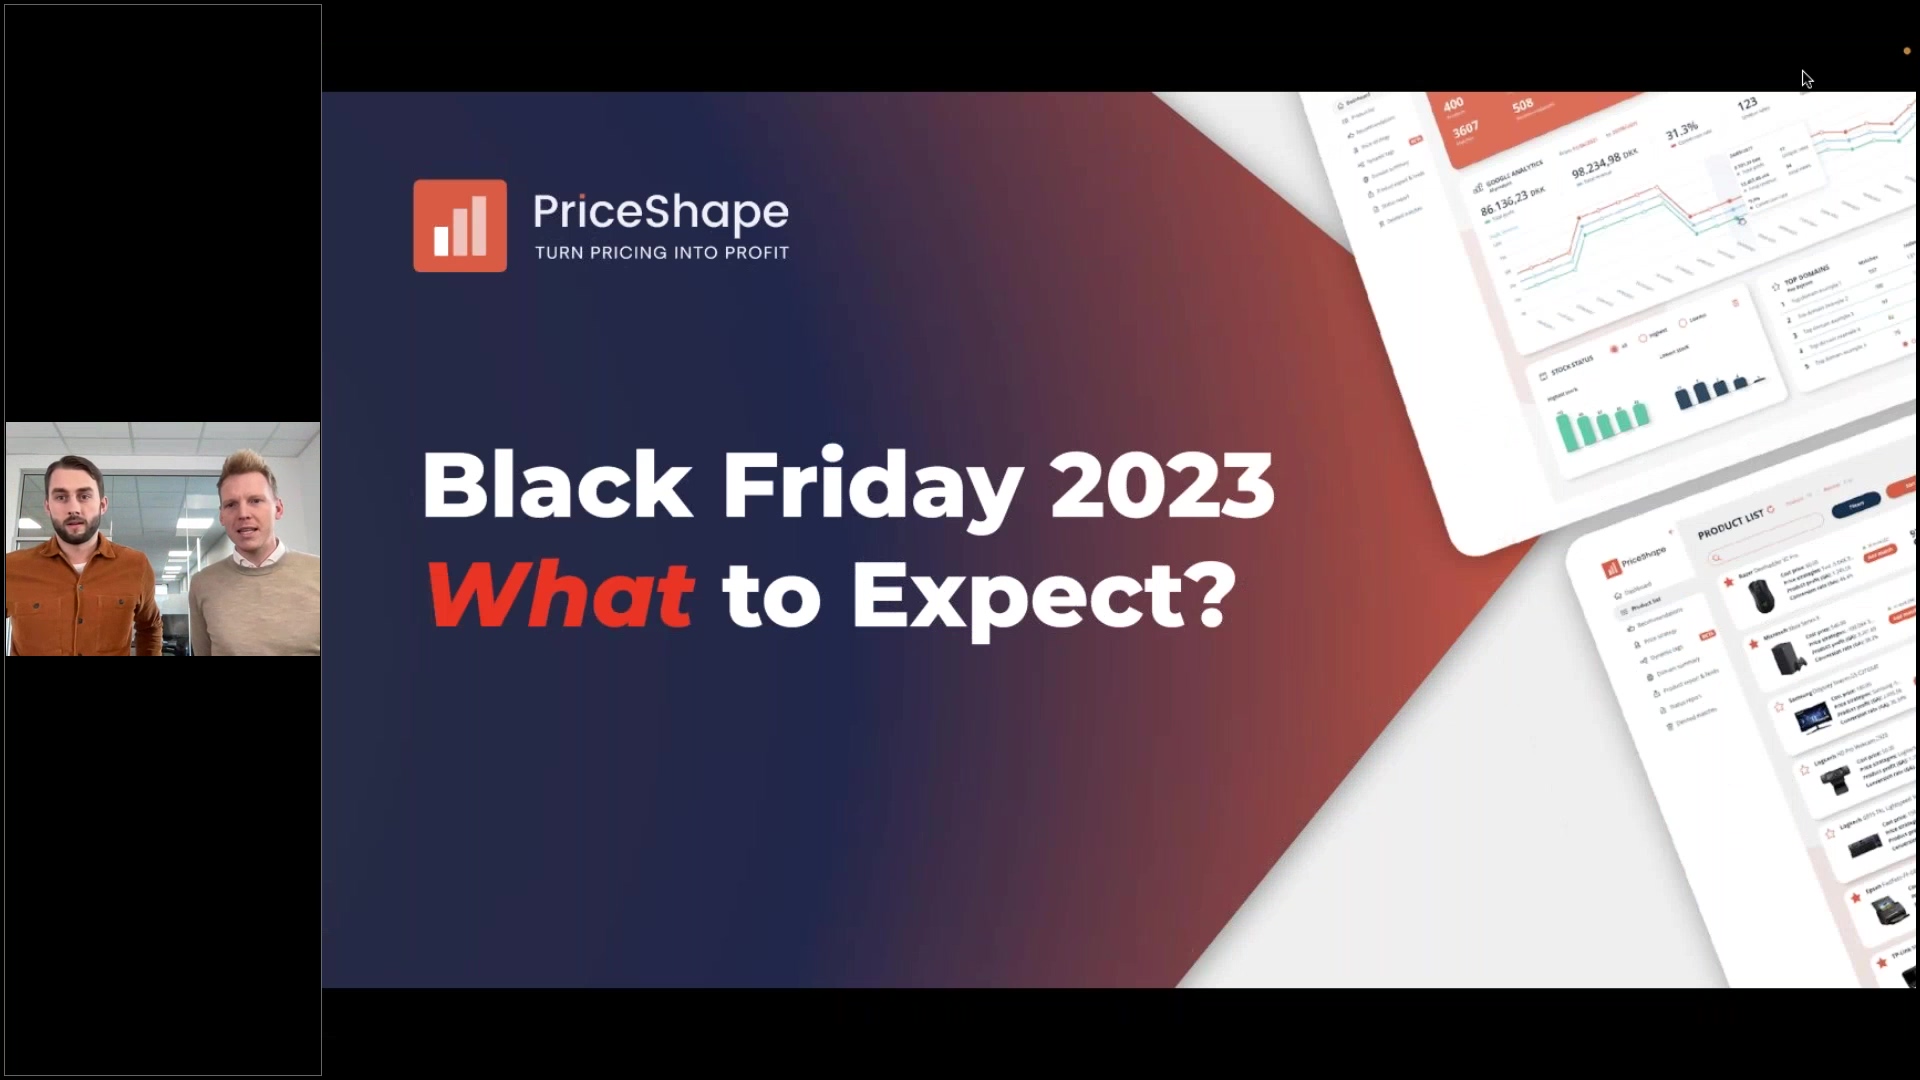 When is Black Friday 2023 and what to expect